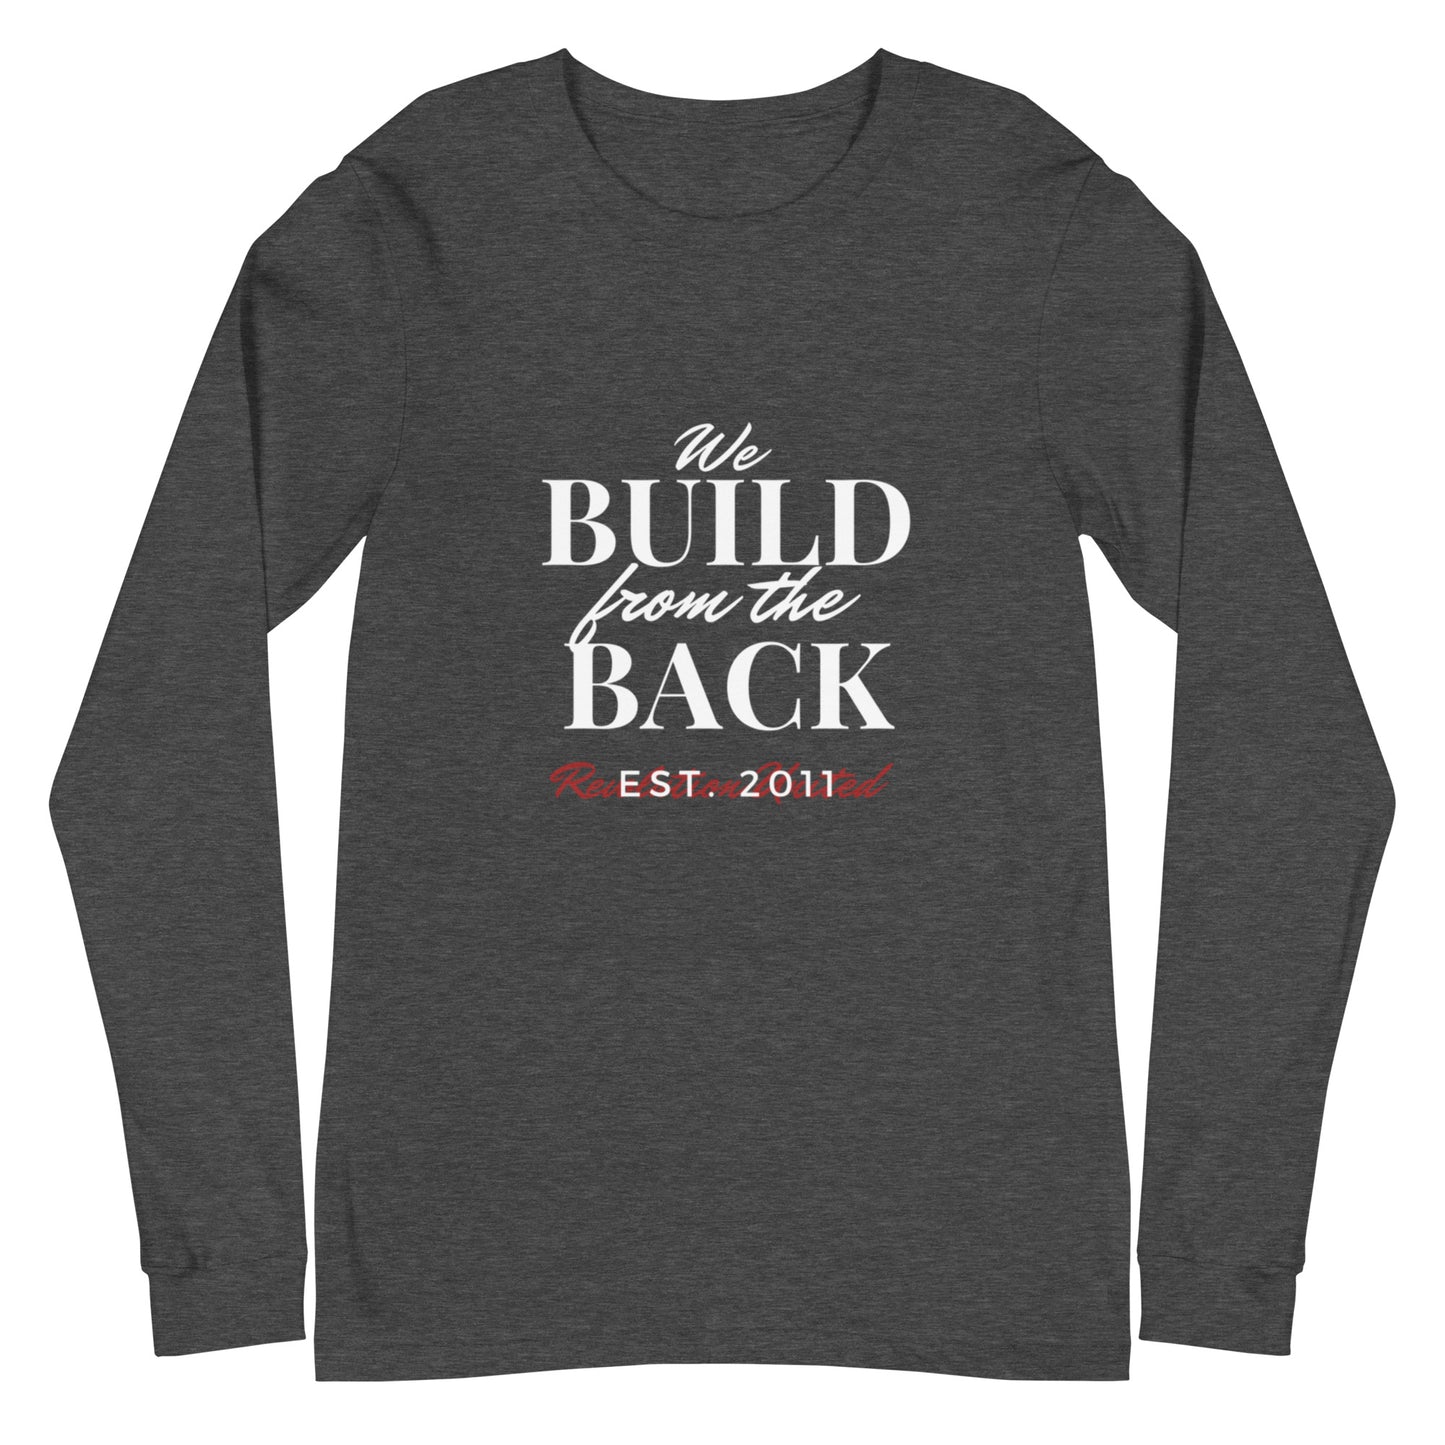 We Build from the Back Long Sleeve